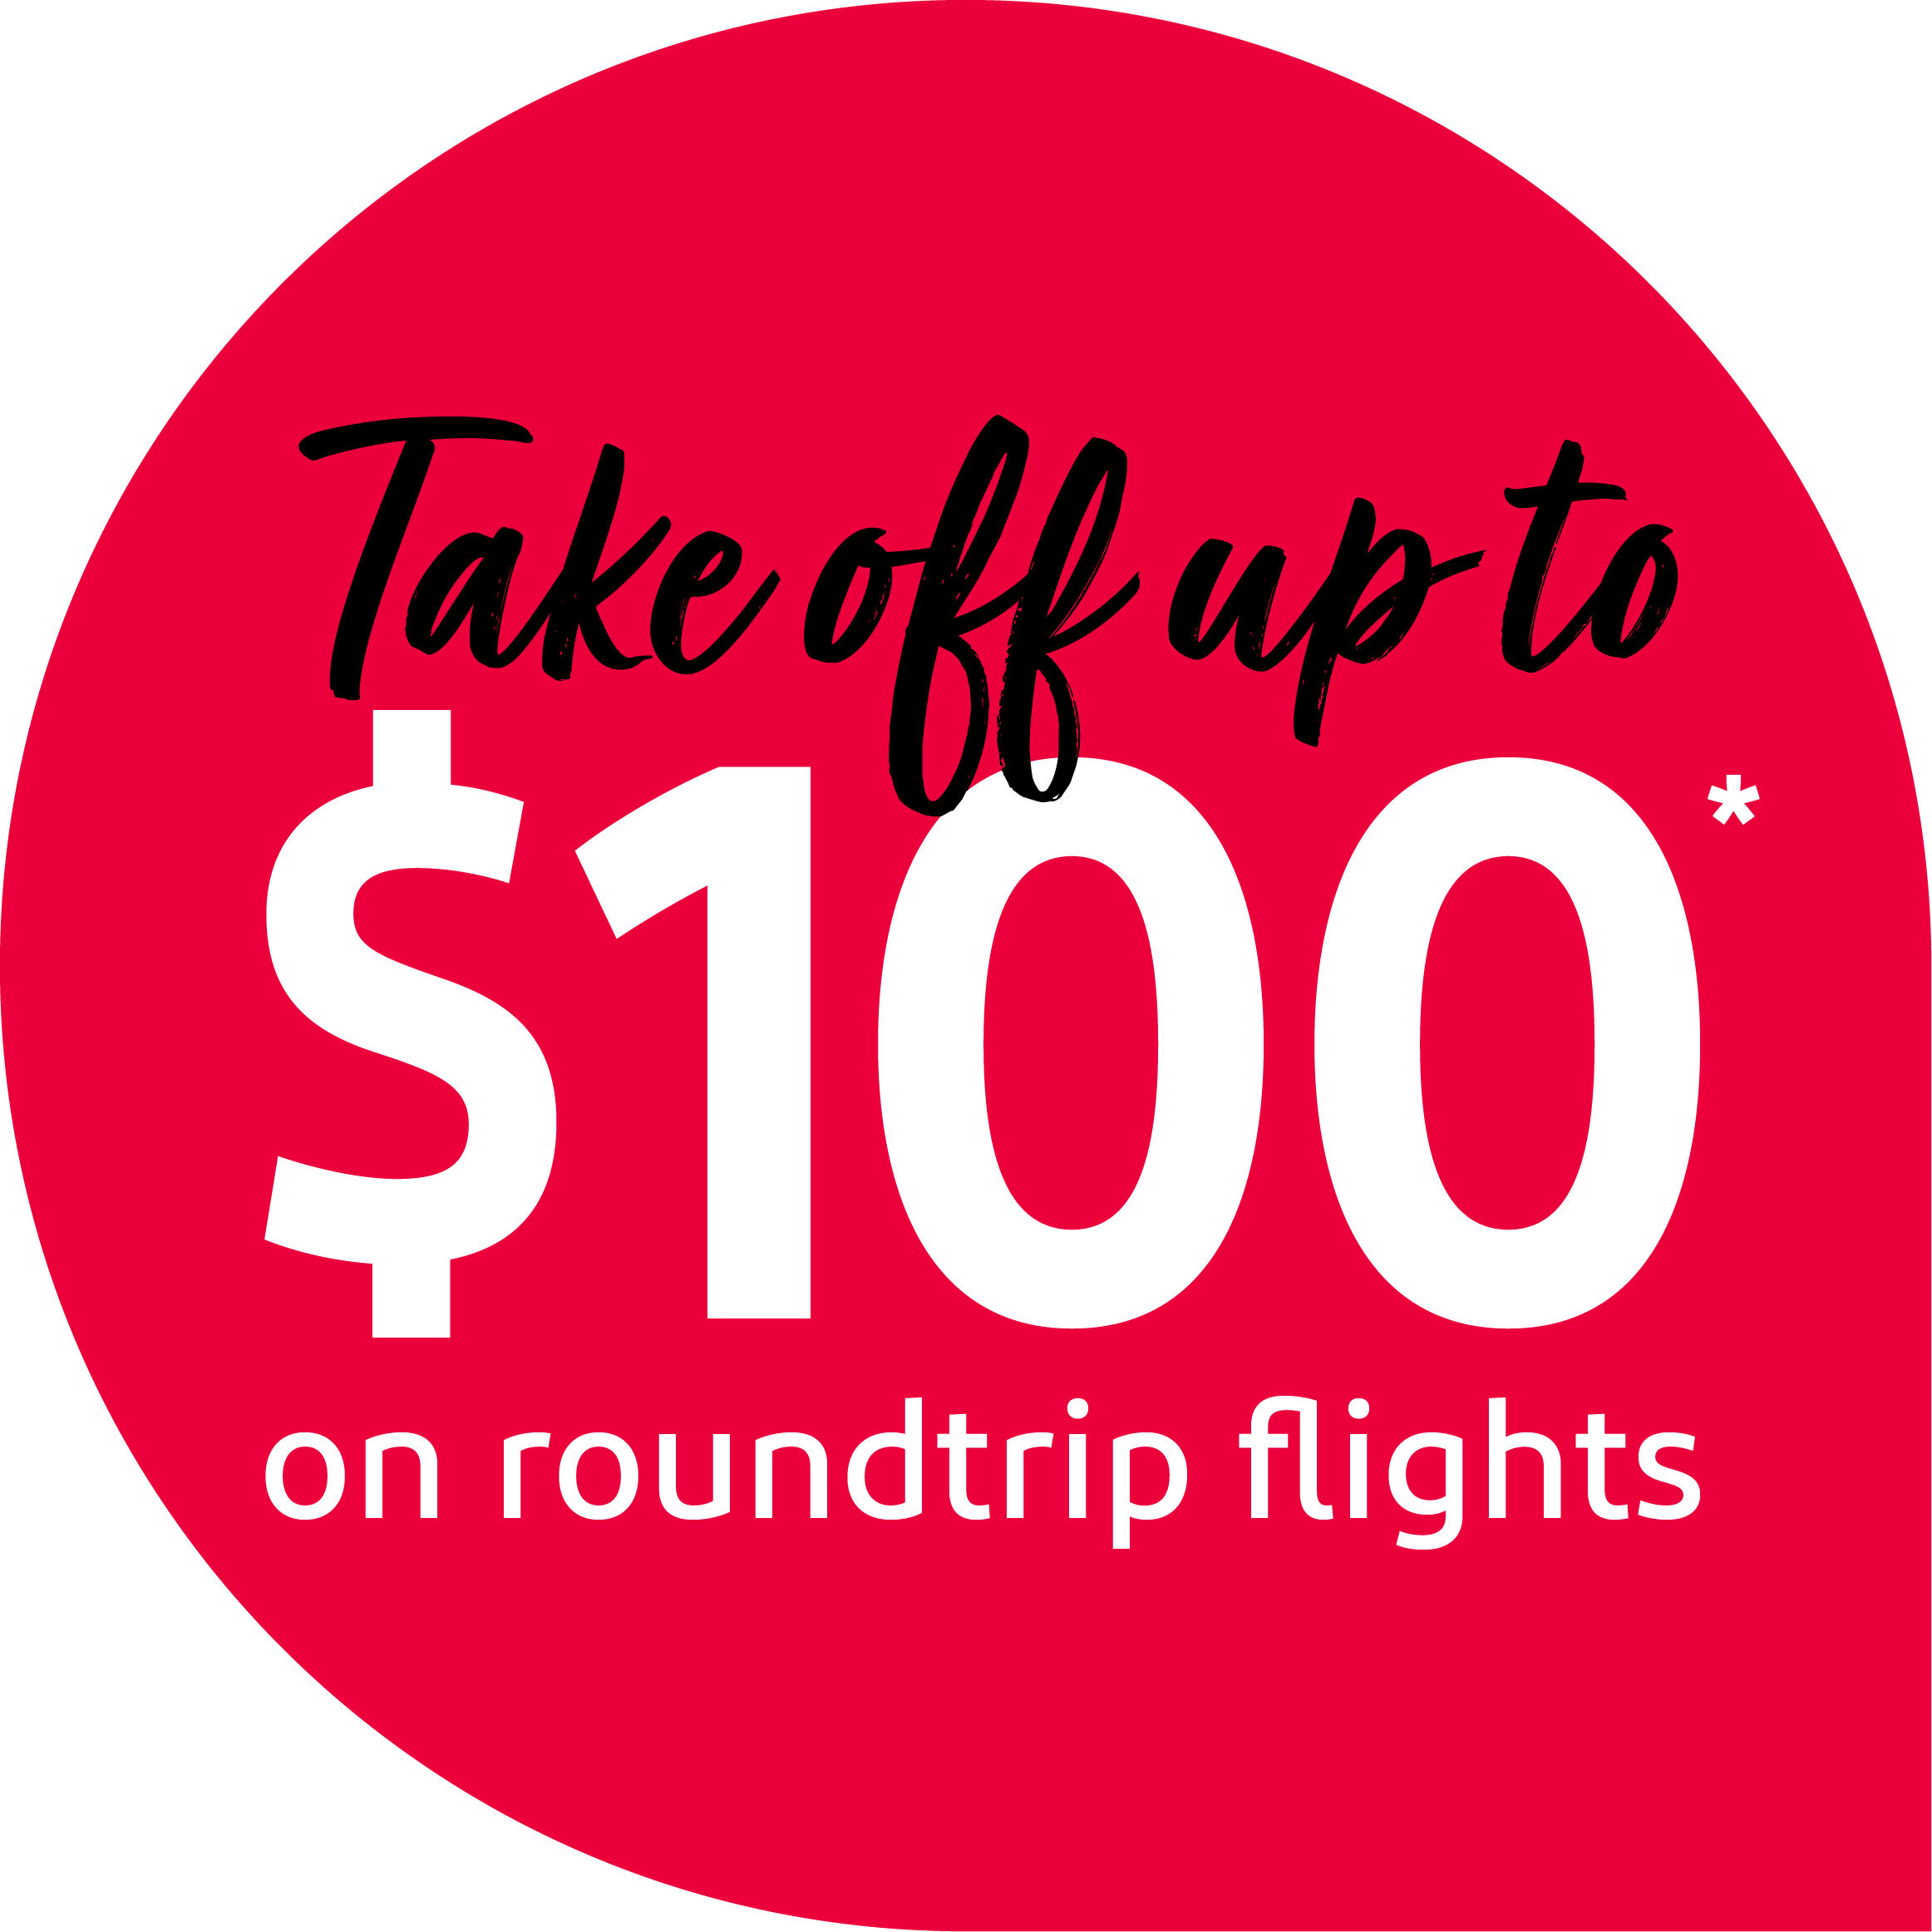 Take off up to $100* on roundtrip flights